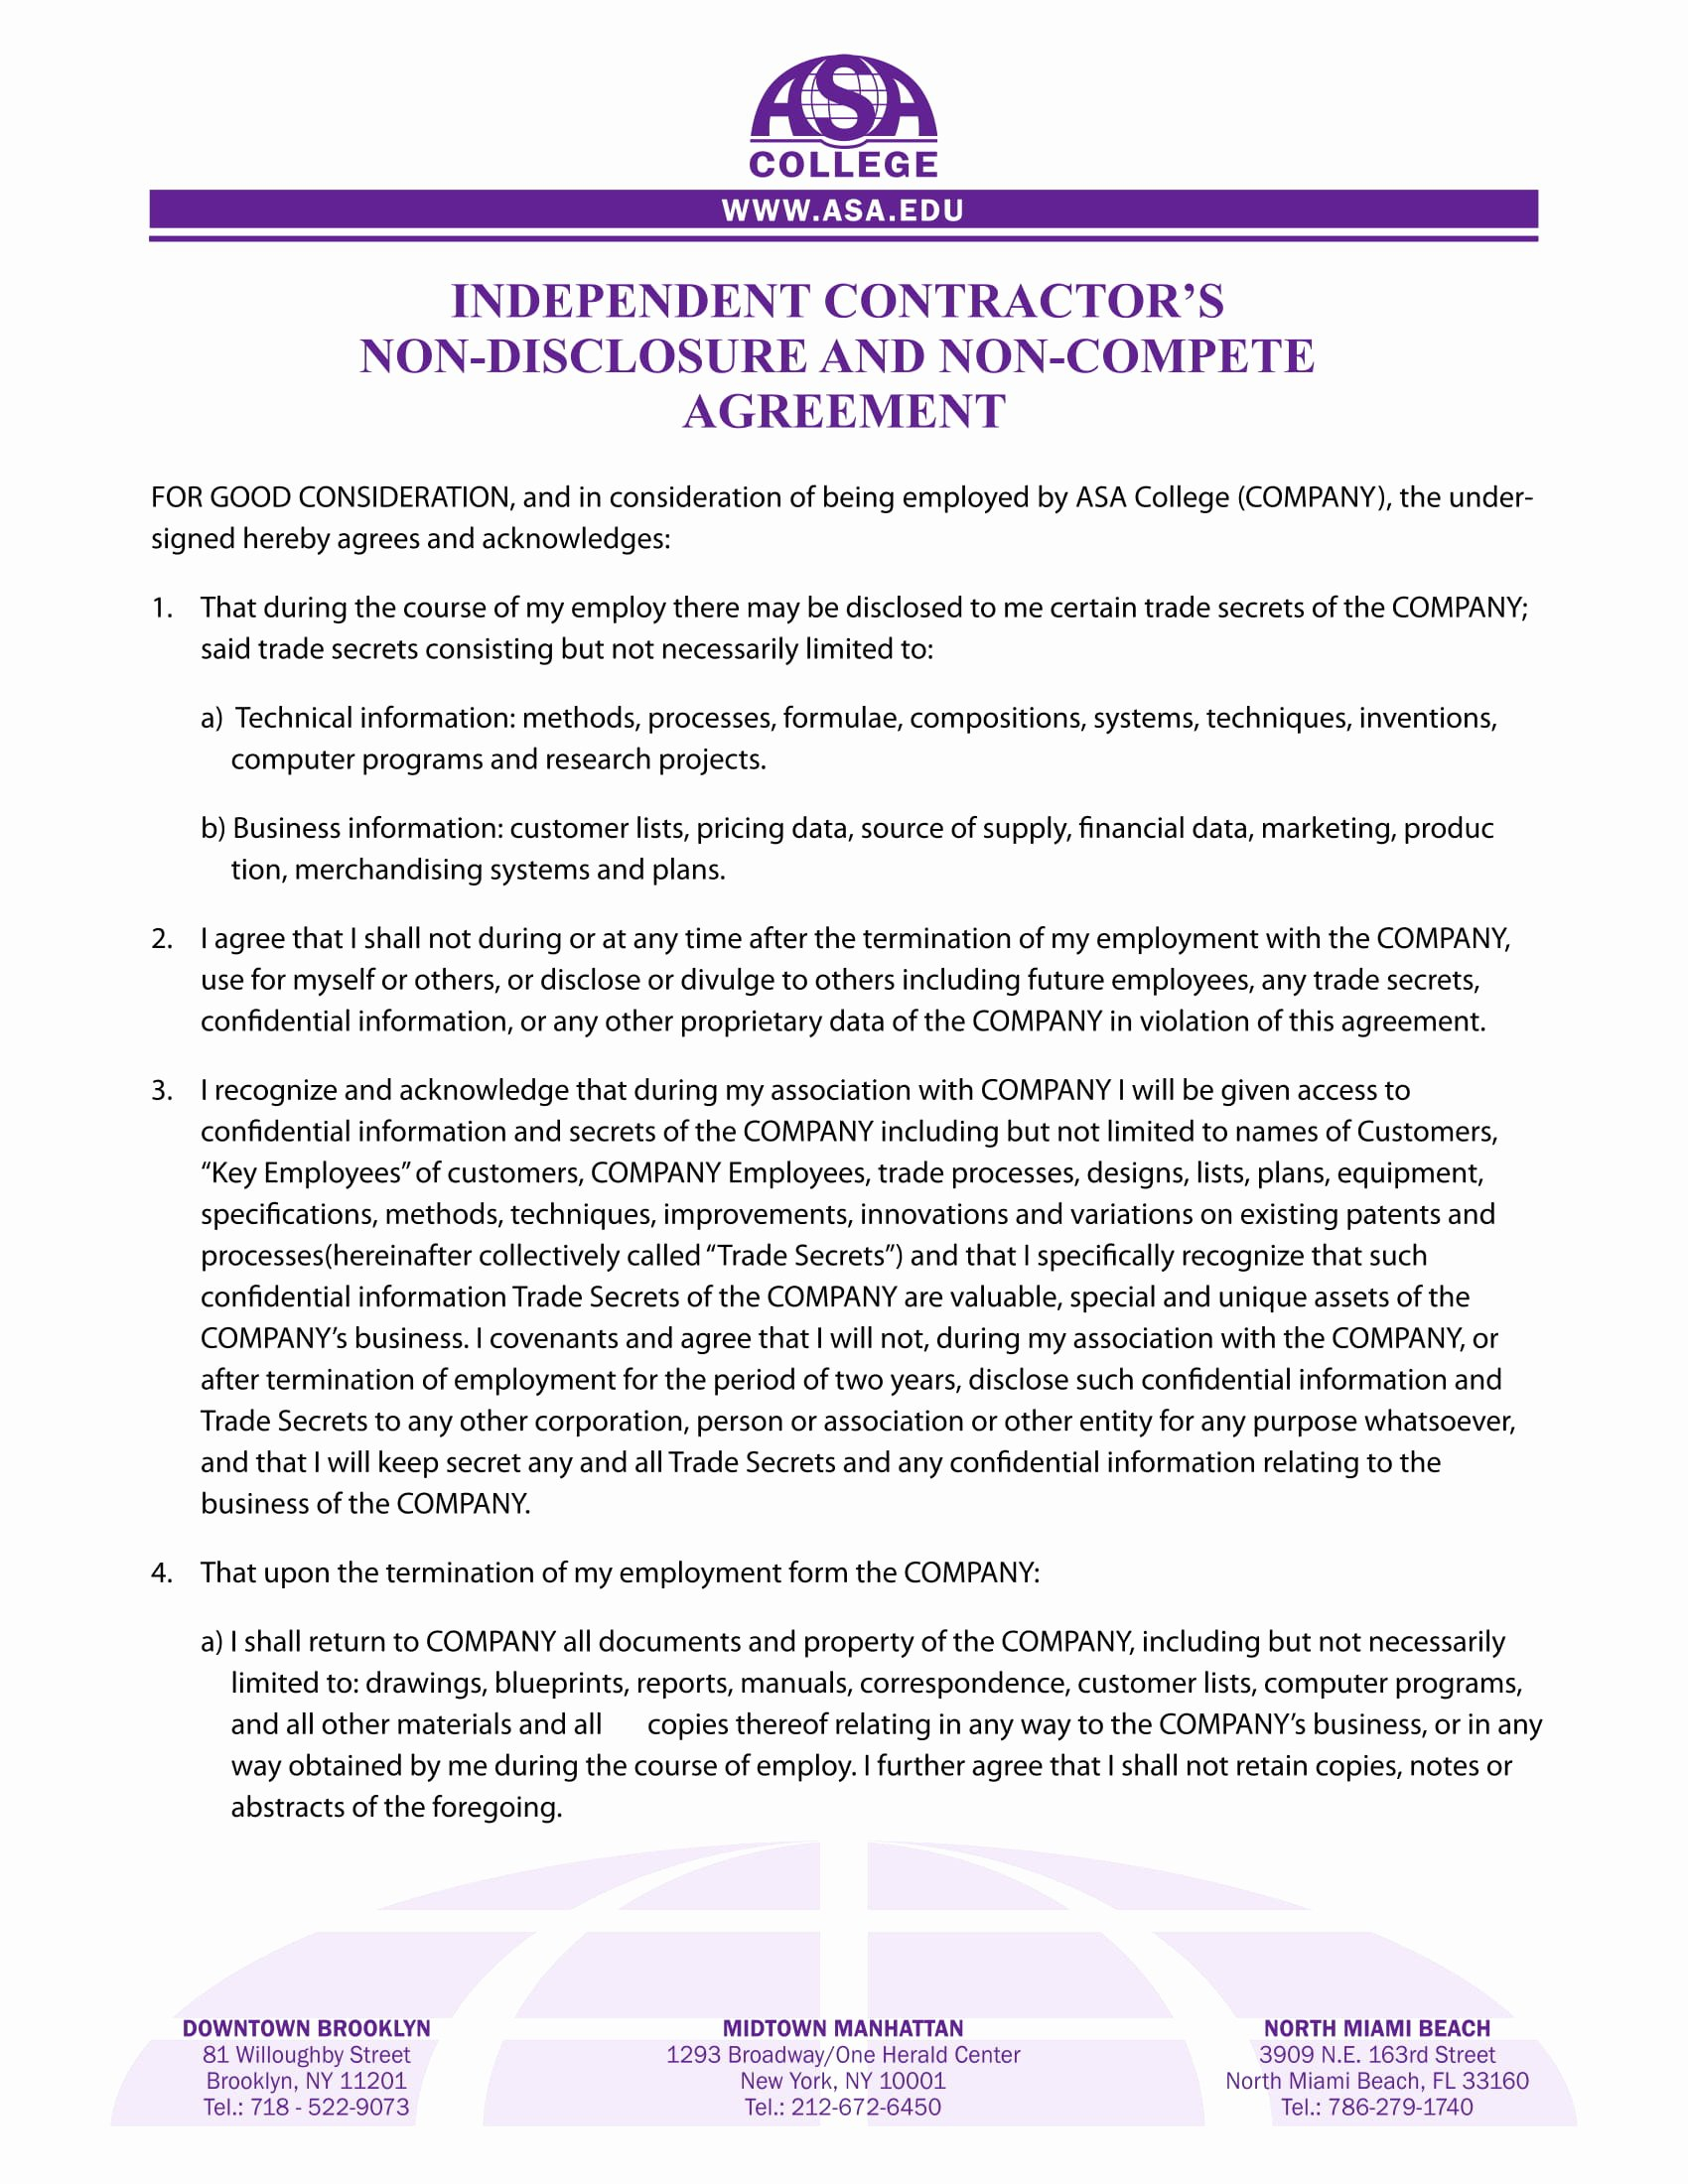 Non Compete Agreement Pdf 28 Affordable Sample Non Competition Agreement Example Design Template